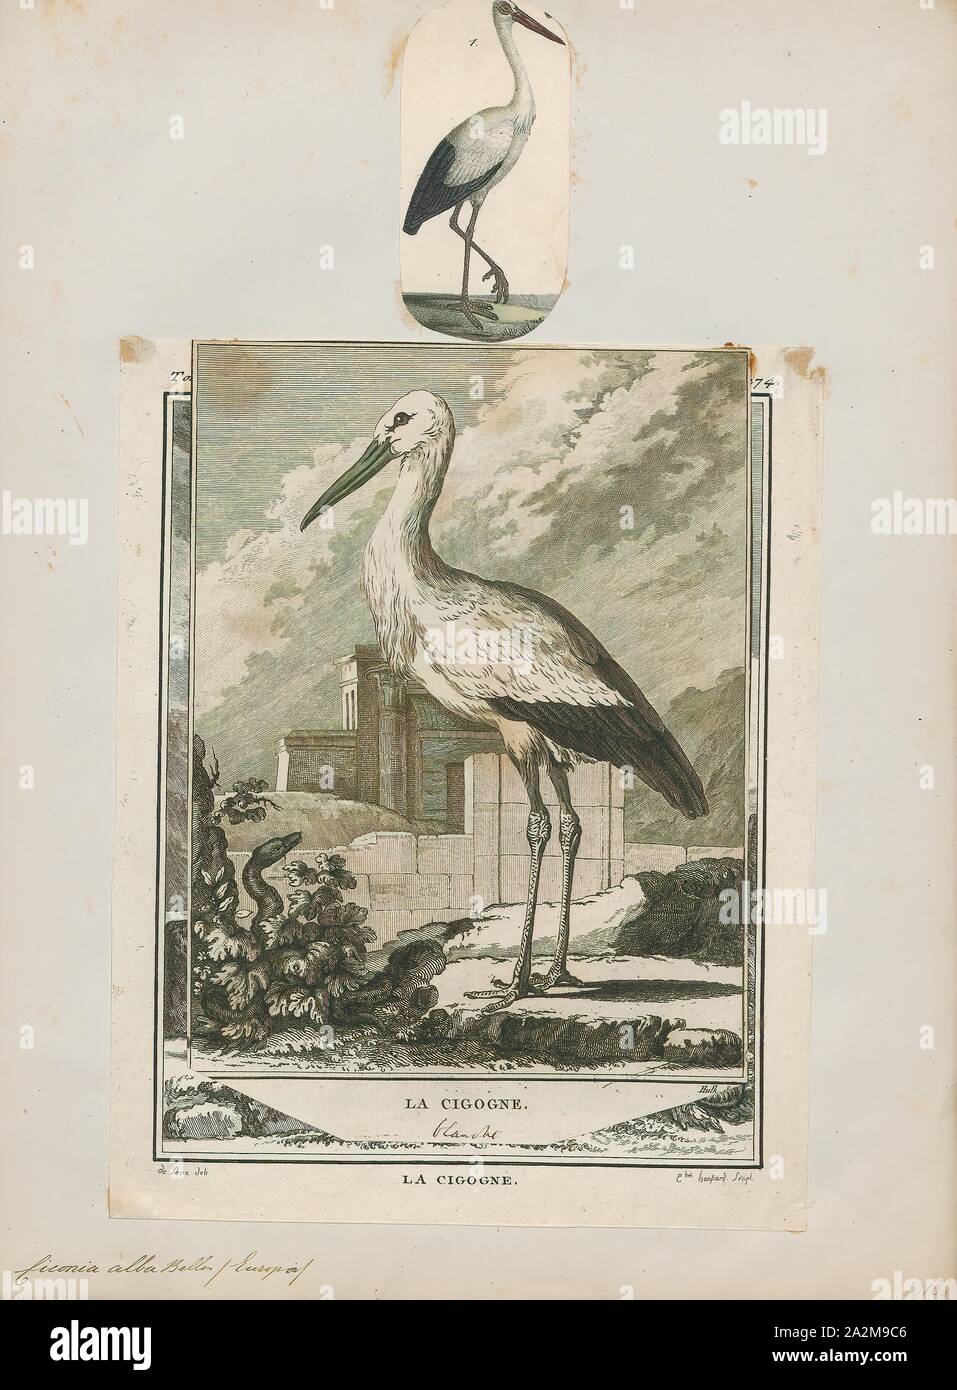 Ciconia alba, Print, The white stork (Ciconia ciconia) is a large bird in the stork family Ciconiidae. Its plumage is mainly white, with black on its wings. Adults have long red legs and long pointed red beaks, and measure on average 100–115 cm (39–45 in) from beak tip to end of tail, with a 155–215 cm (61–85 in) wingspan. The two subspecies, which differ slightly in size, breed in Europe (north to Finland), northwestern Africa, southwestern Asia (east to southern Kazakhstan) and southern Africa. The white stork is a long-distance migrant, wintering in Africa from tropical Sub-Saharan Africa Stock Photo